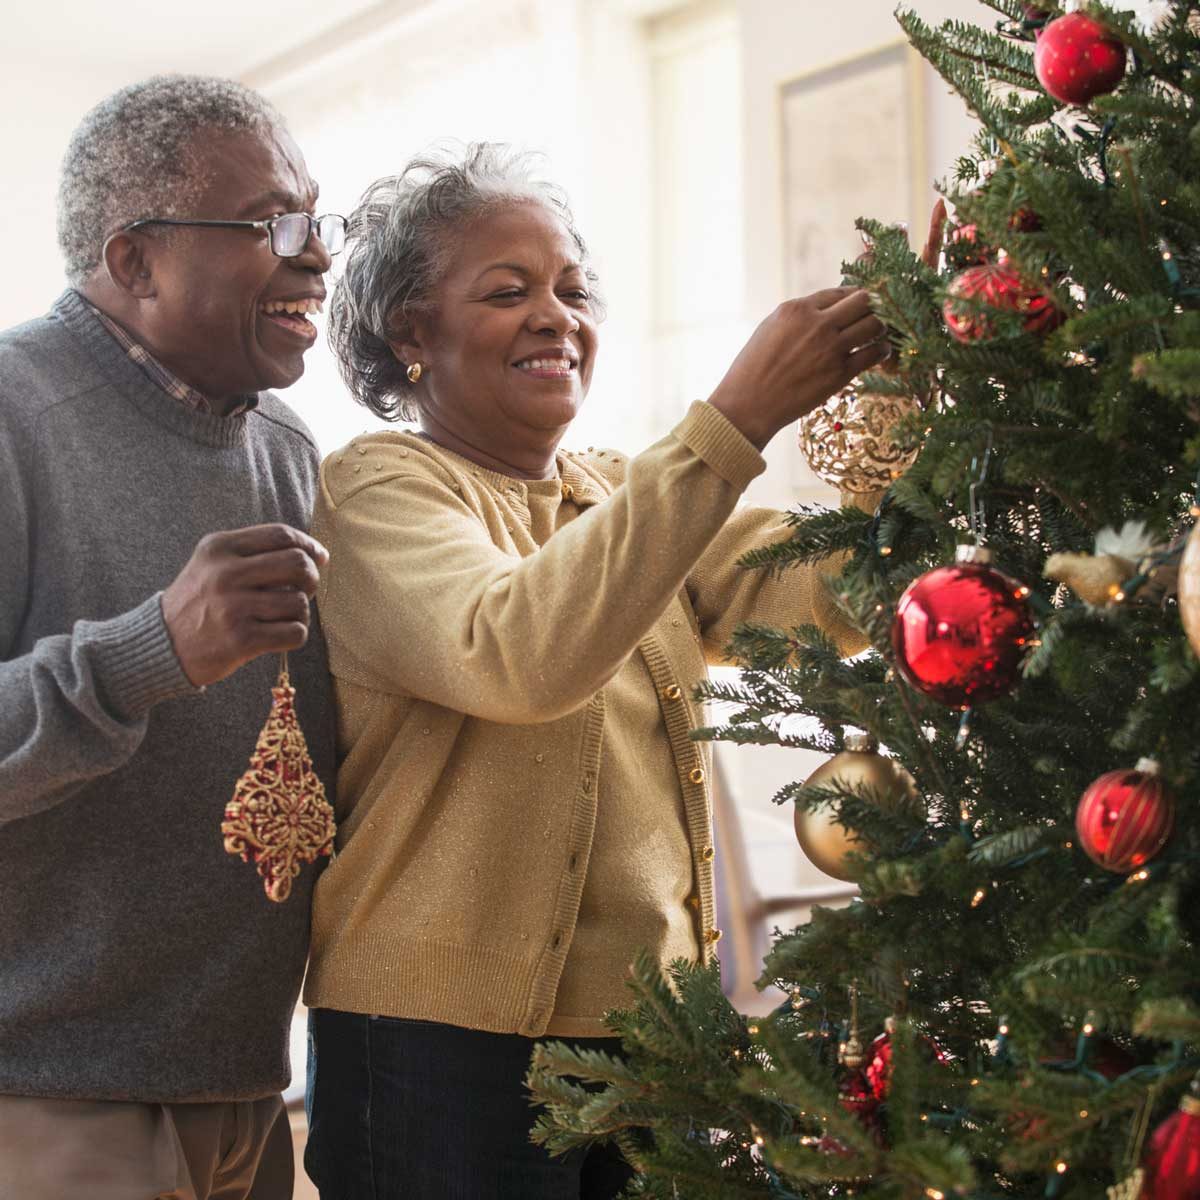 https://www.familyhandyman.com/wp-content/uploads/2019/11/decorate-christmas-tree-GettyImages-508484197.jpg?fit=700%2C1024